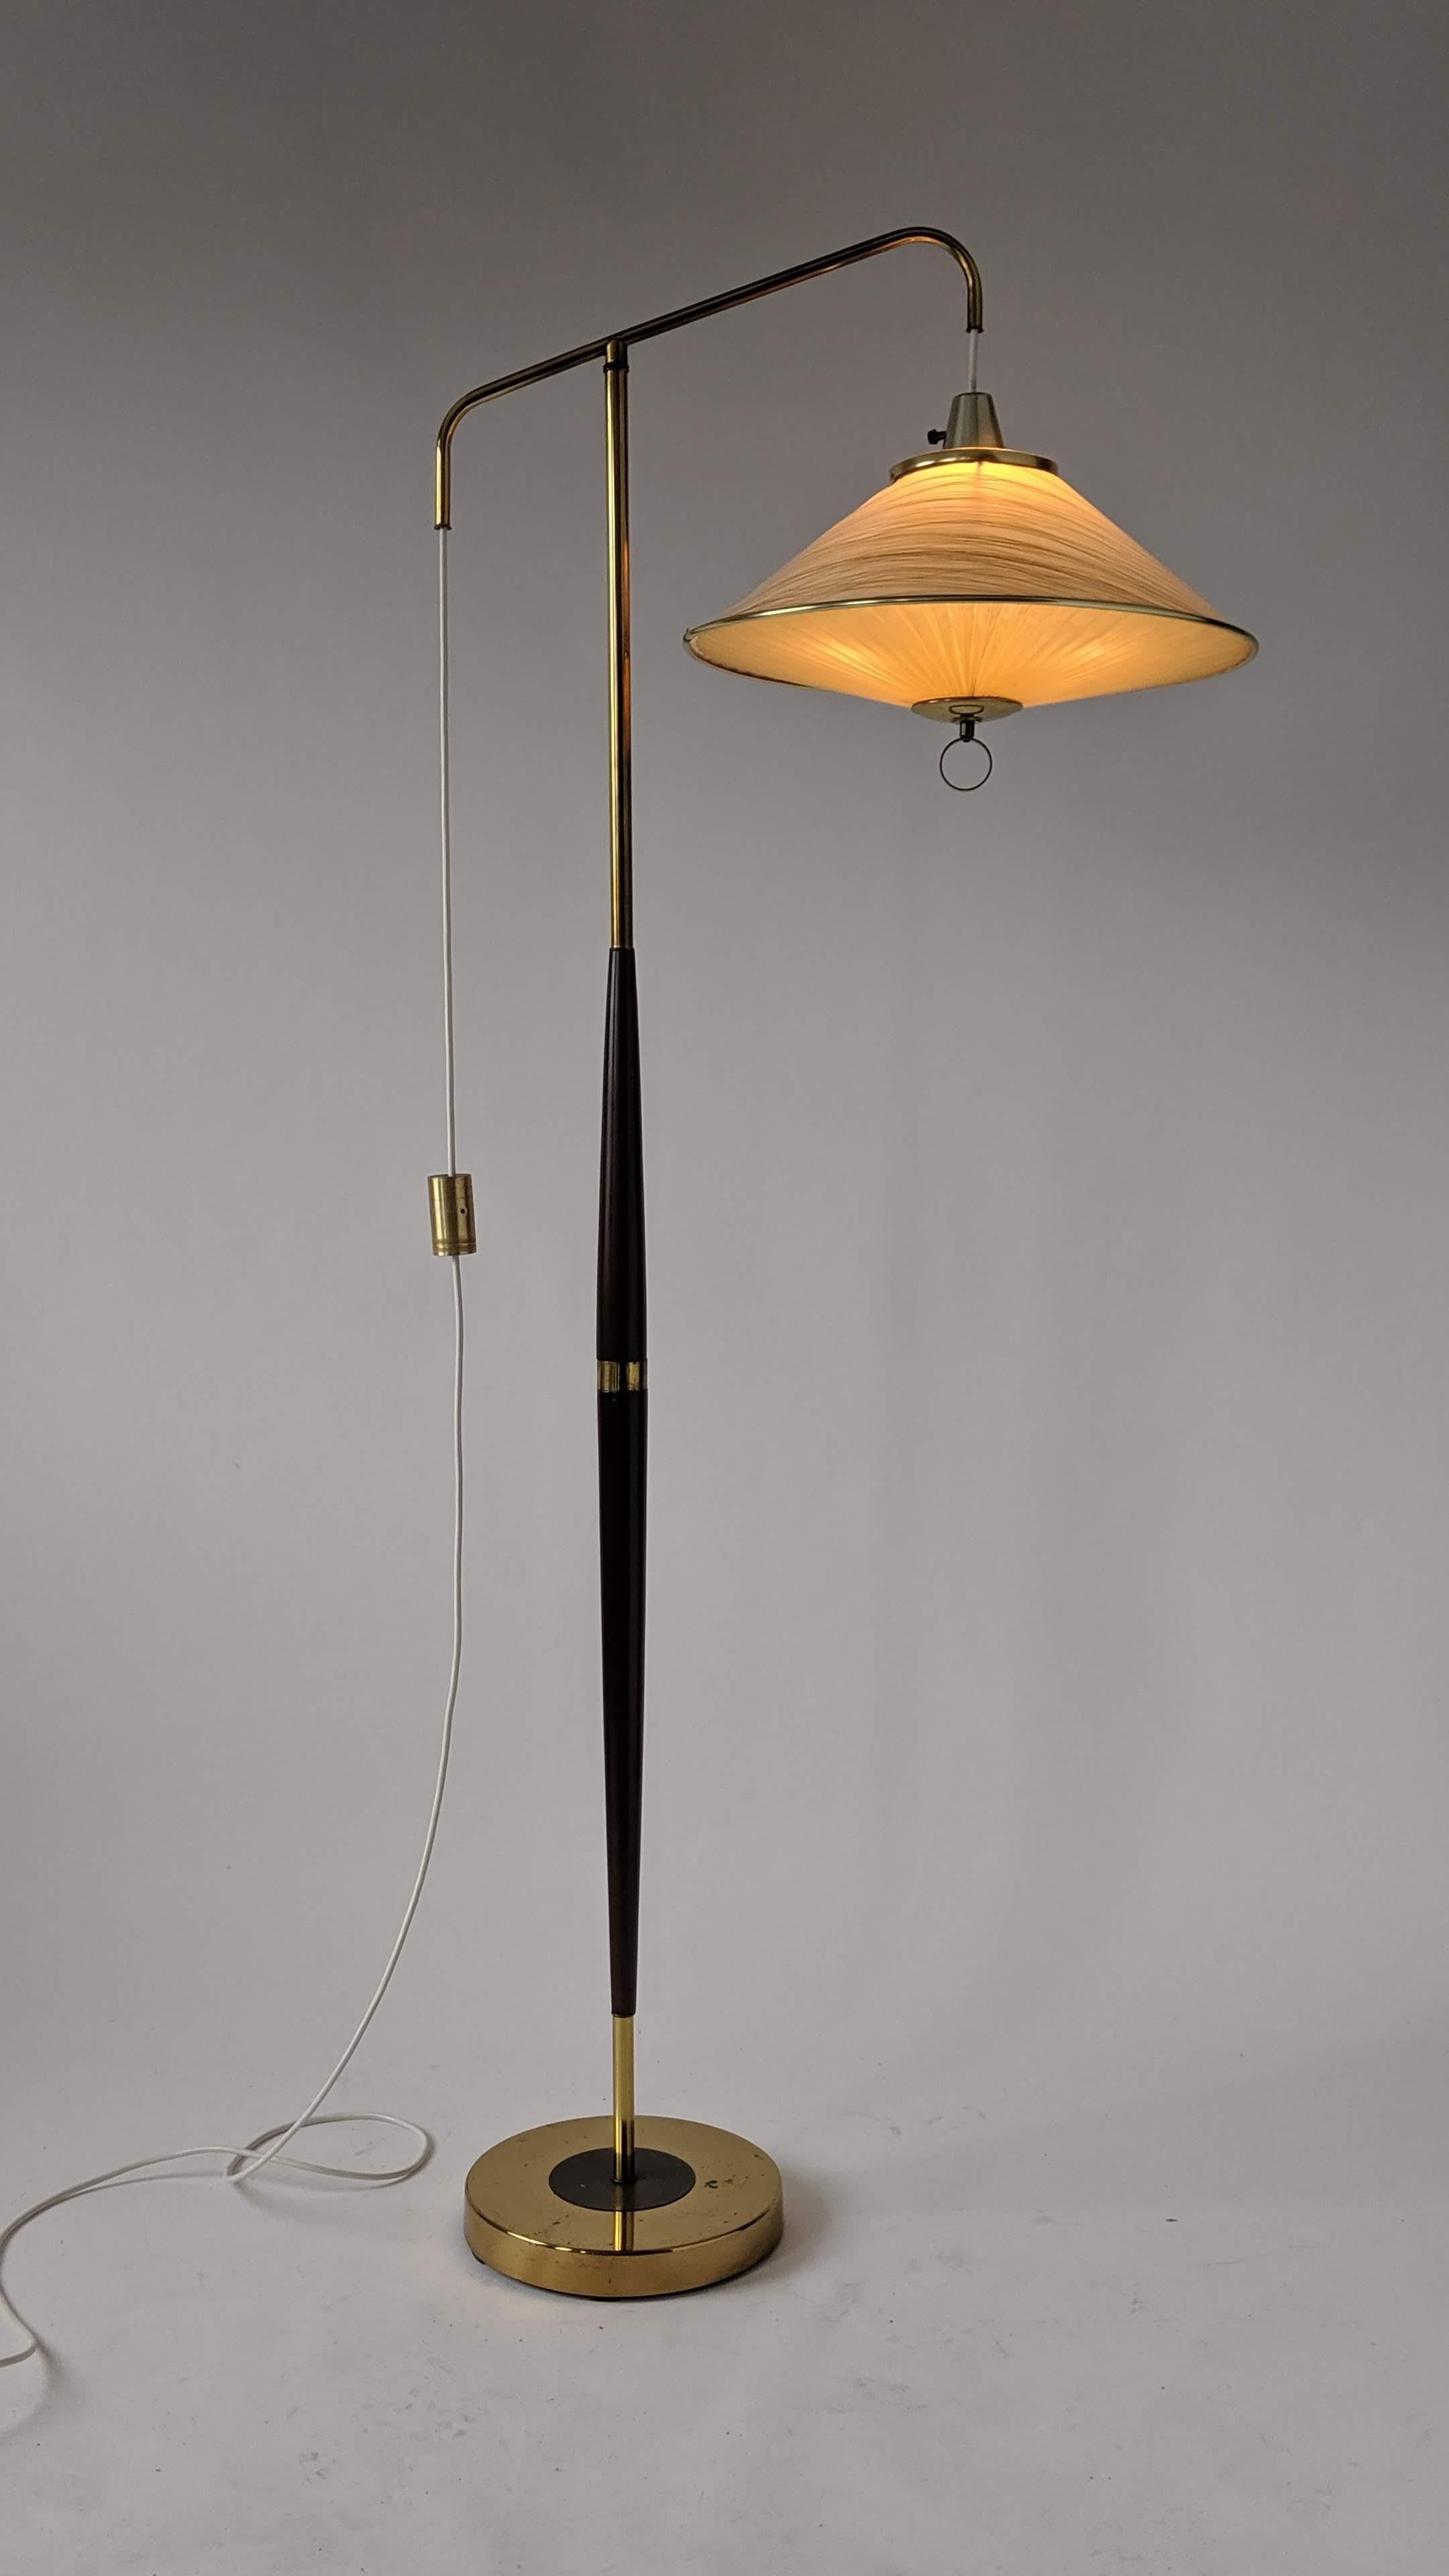 Well made, solid construction brass and walnut floor lamp with height adjustable shade. 

Counter weight mechanism work extremely well.

Original plastic shade and diffuser. Measure 19 in. wide by 12 in. high.

Rotating on/off switch on